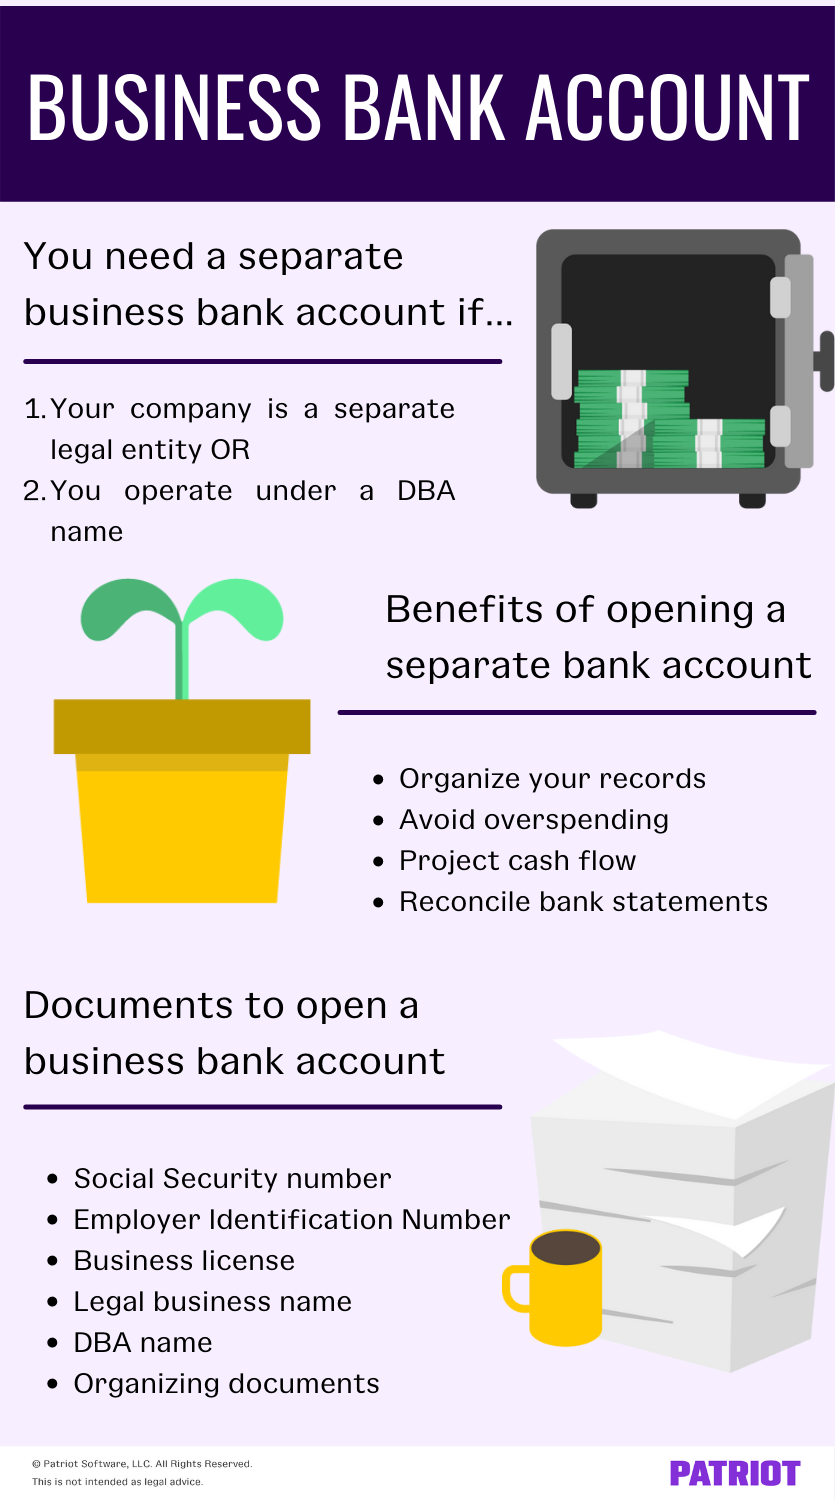 Infographic outlining reasons you need a separate business bank account, some benefits, and documents to open a business bank account